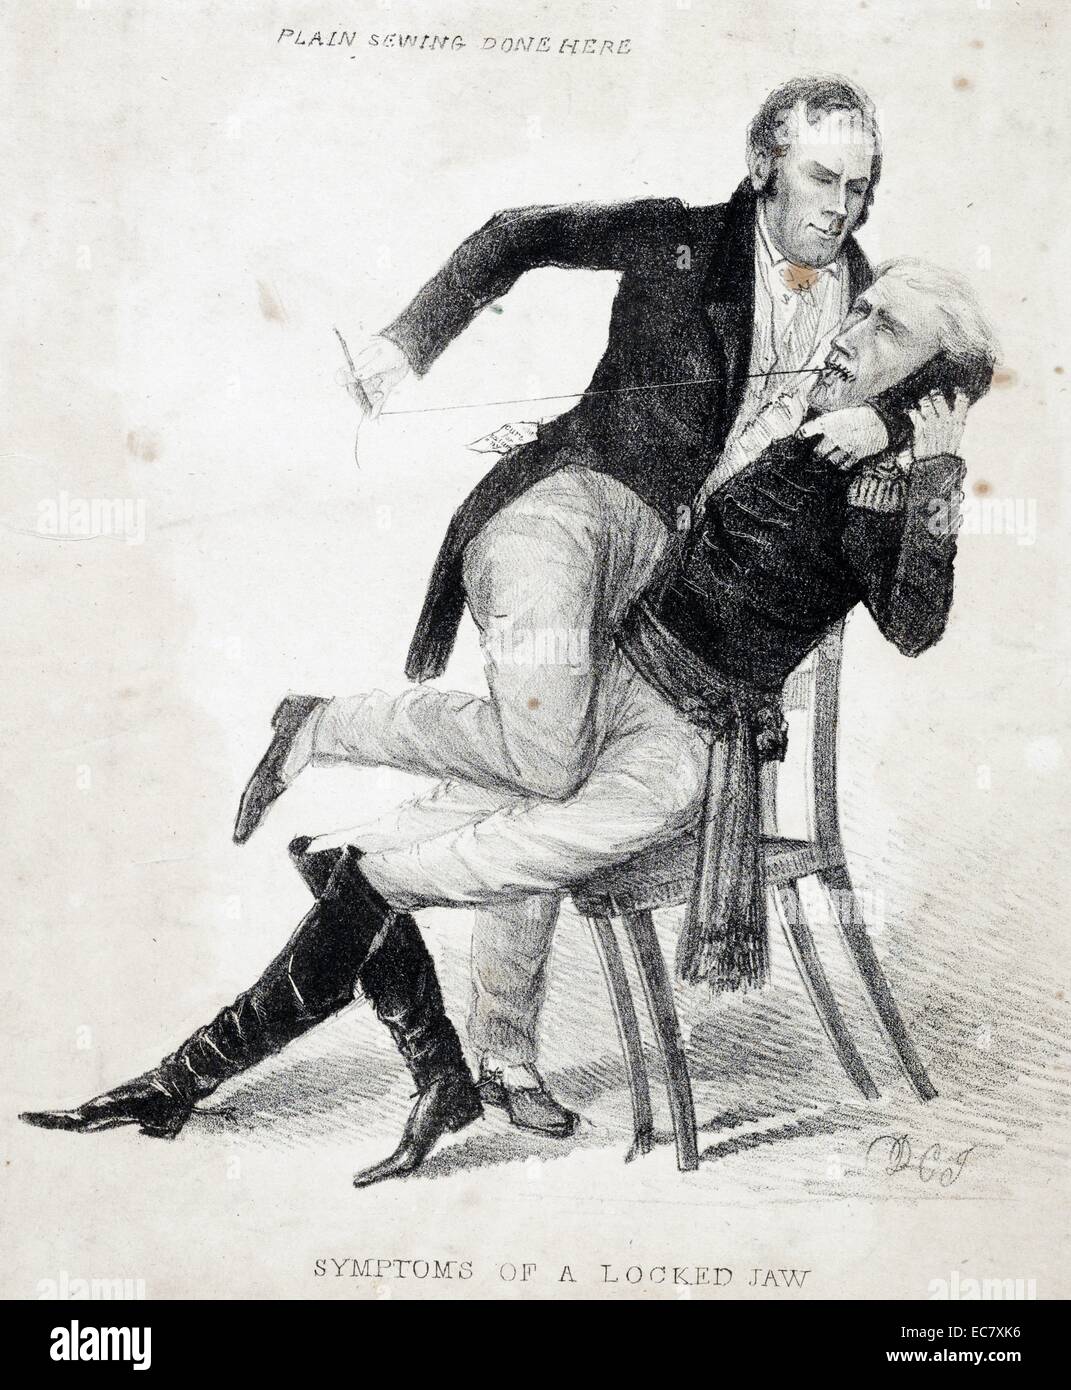 Symptoms of a locked jaw. Plain sewing done here' The caricature reflects the bitter antagonism between Kentucky senator Henry Clay and President Andrew Jackson, during the protracted battle over the future of the Bank of the United States from 1832 through 1836. The print may relate specifically to Clay's successful 1834 campaign to exclude from the Senate journal Jackson's statement of protest against Congressional censure of his earlier actions on the Bank. Clay is shown restraining a seated, uniformed Jackson and sewing up his mouth. Stock Photo